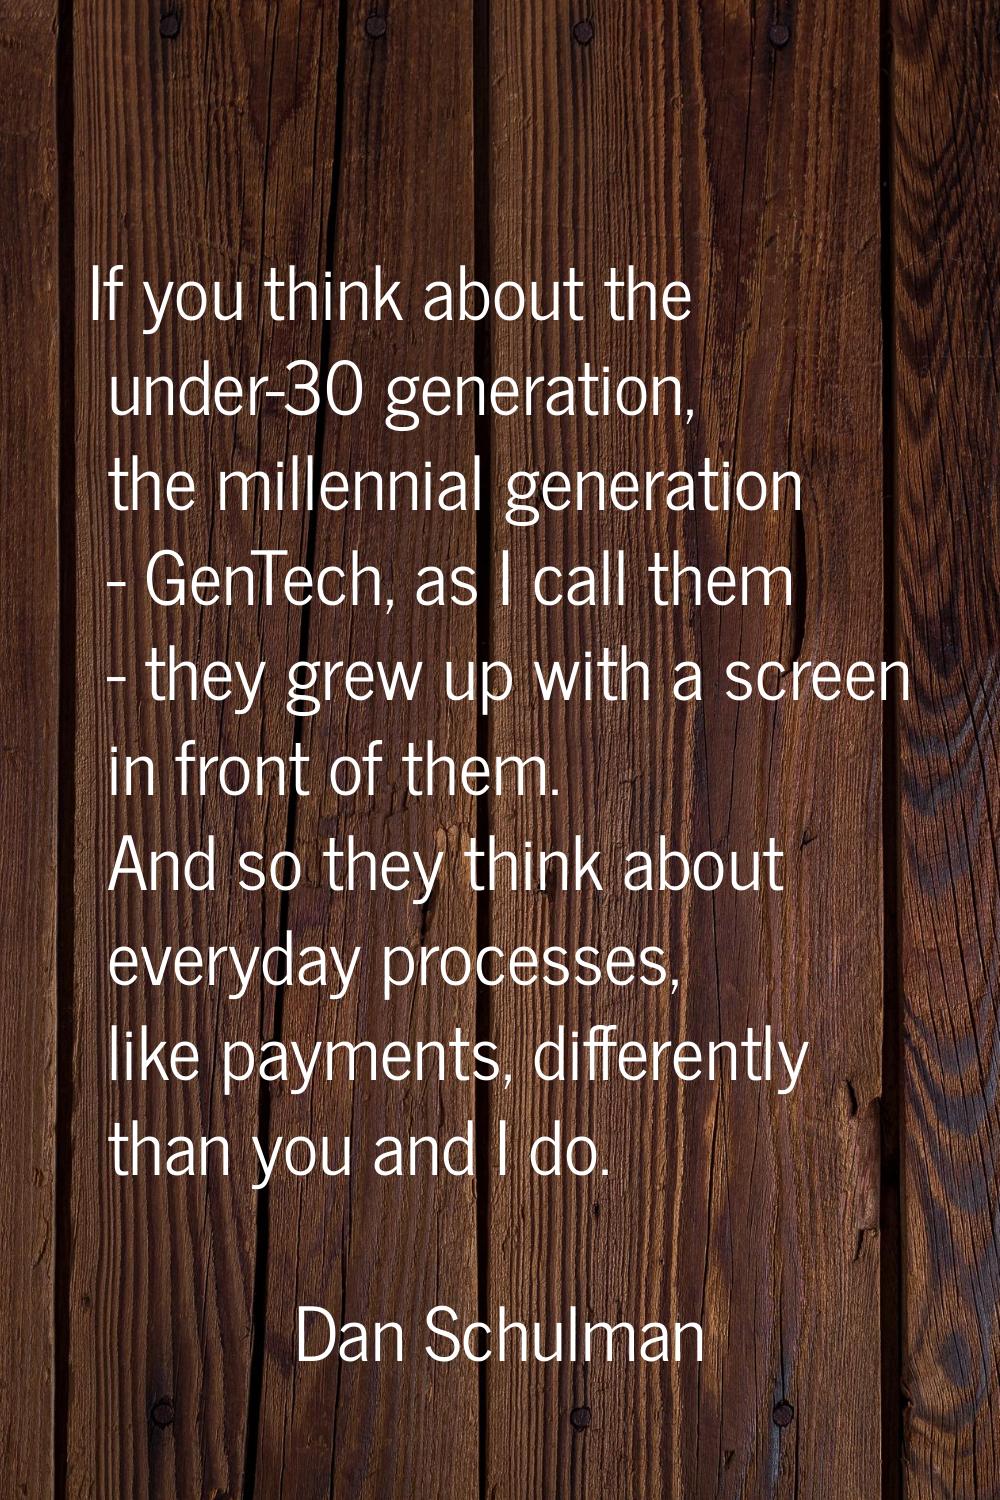 If you think about the under-30 generation, the millennial generation - GenTech, as I call them - t